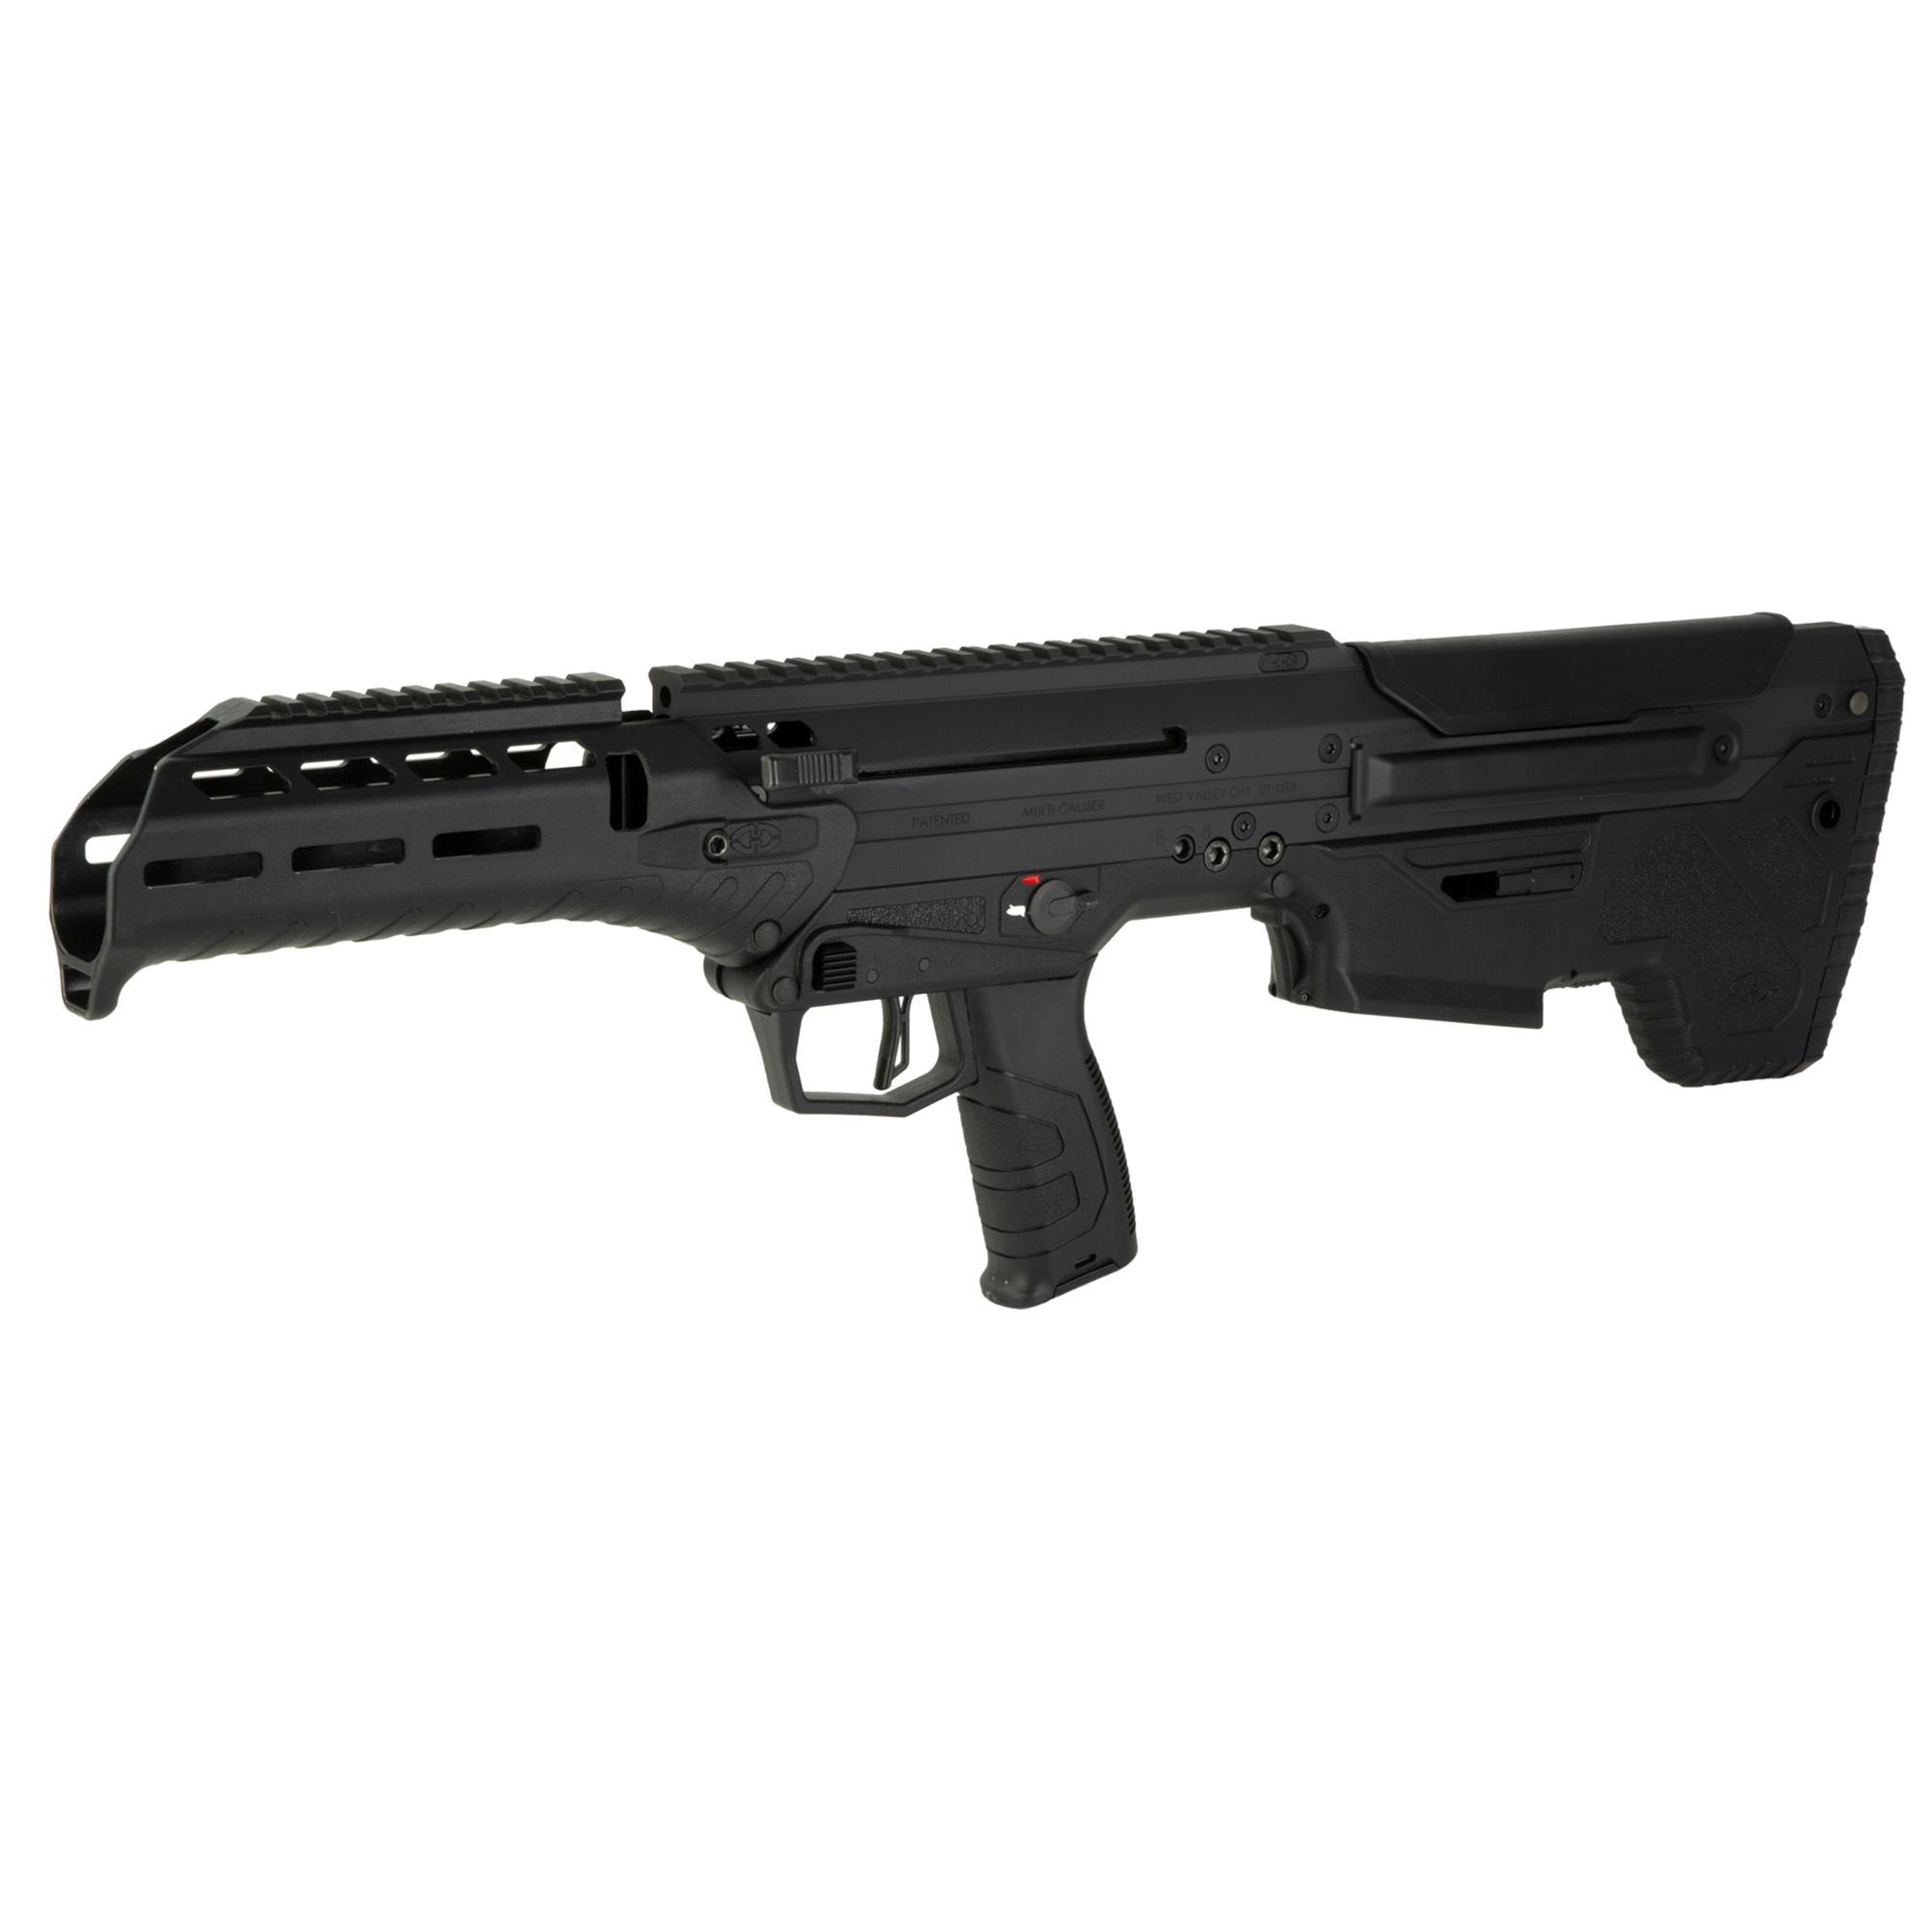 Long Guns DT MDRX CHASSIS SIDE BLK image 3